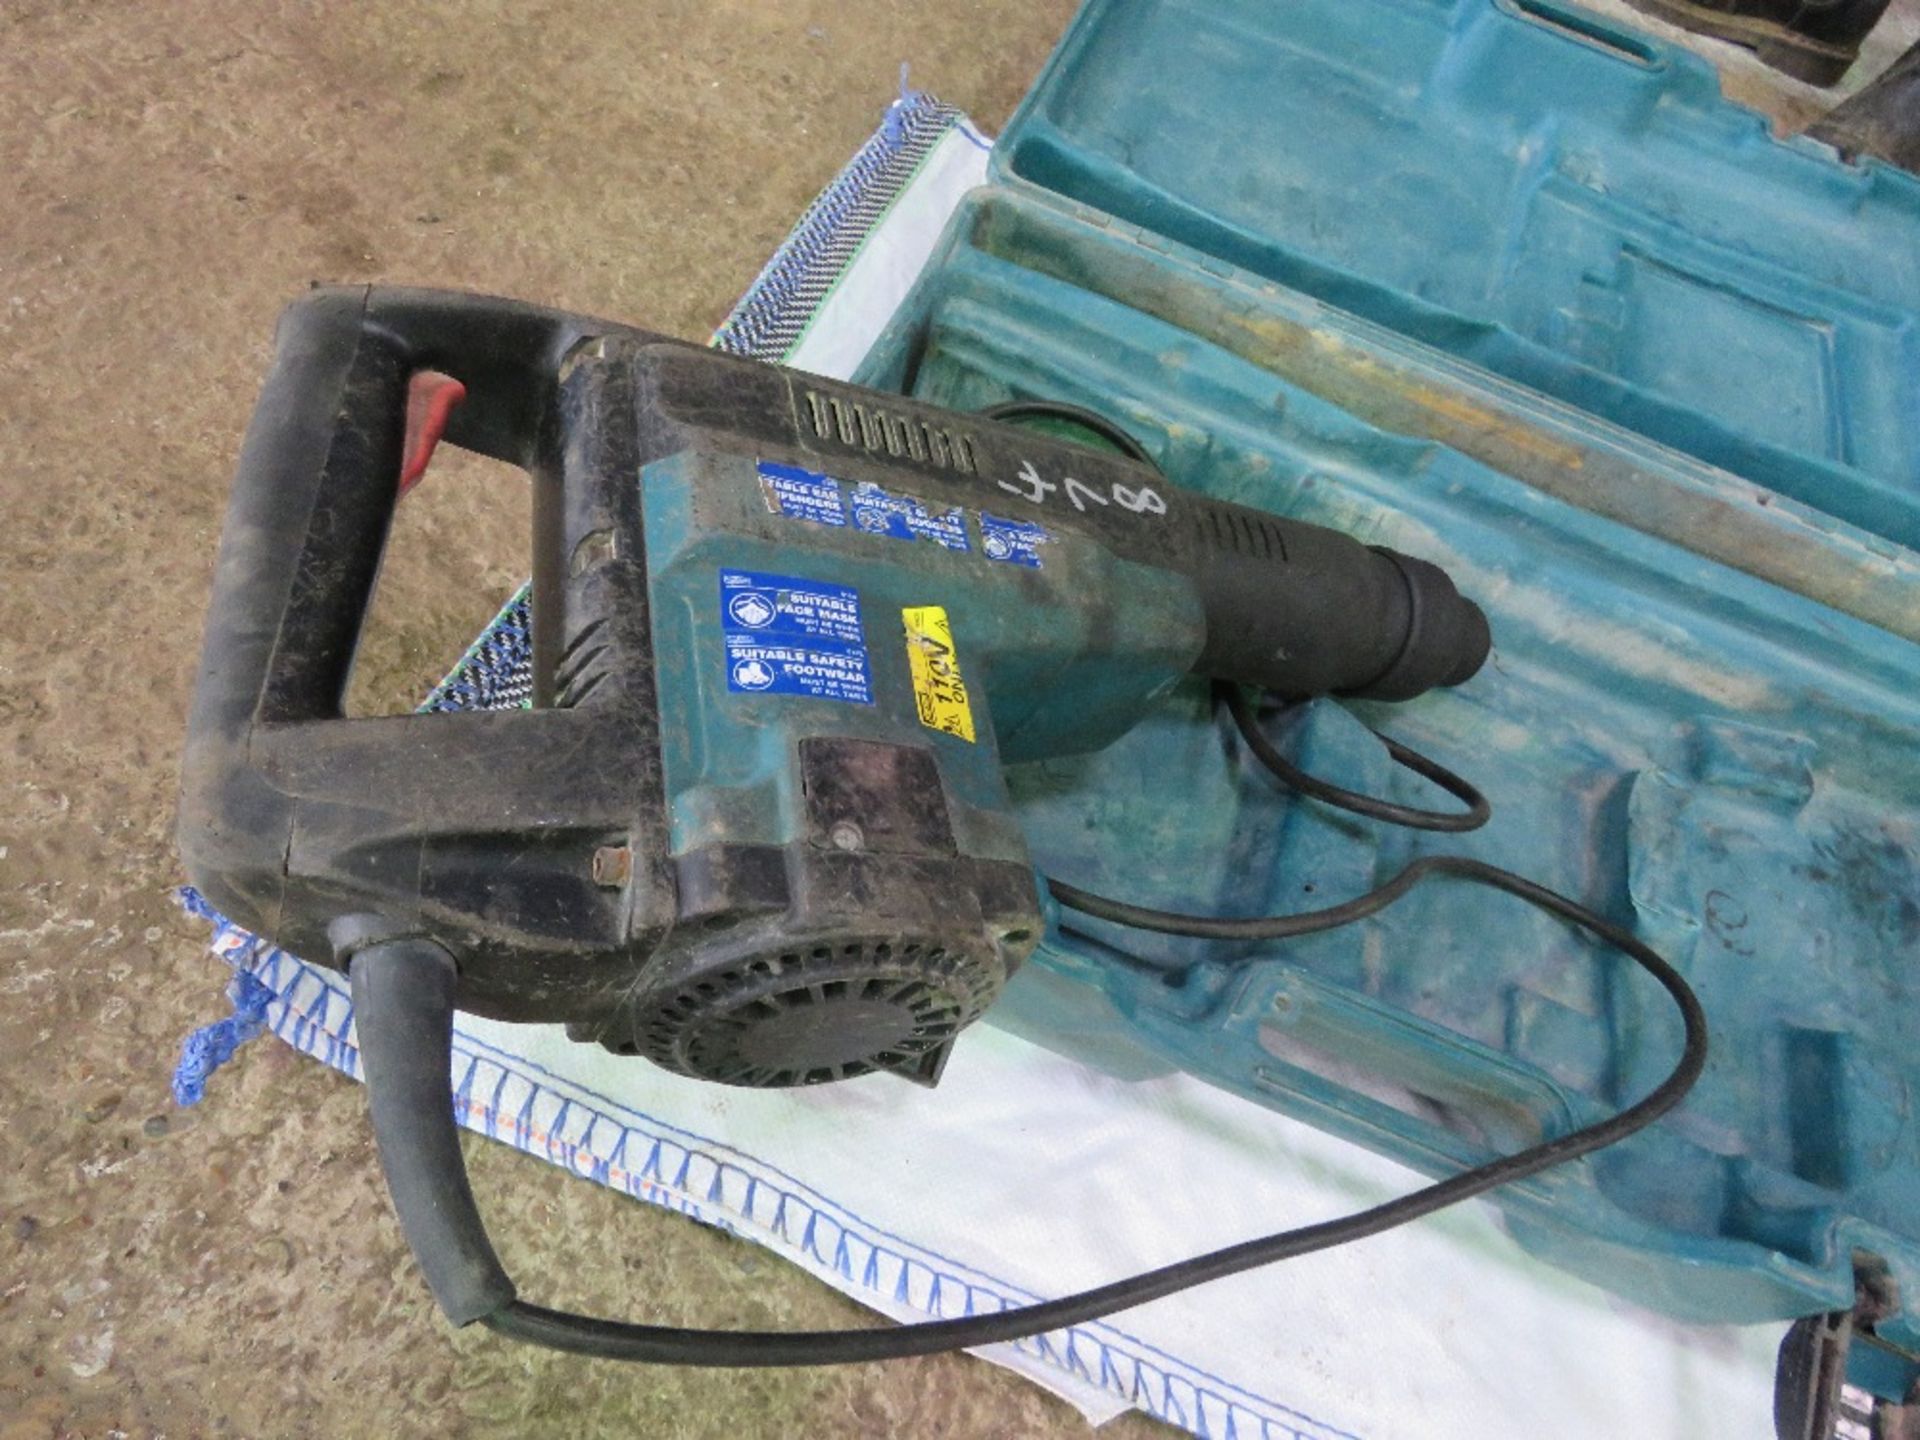 MAKITA 110VOLT HEAVY DUTY BREAKER IN A CASE. SOURCED FROM LOCAL DEPOT CLOSURE. - Image 3 of 3